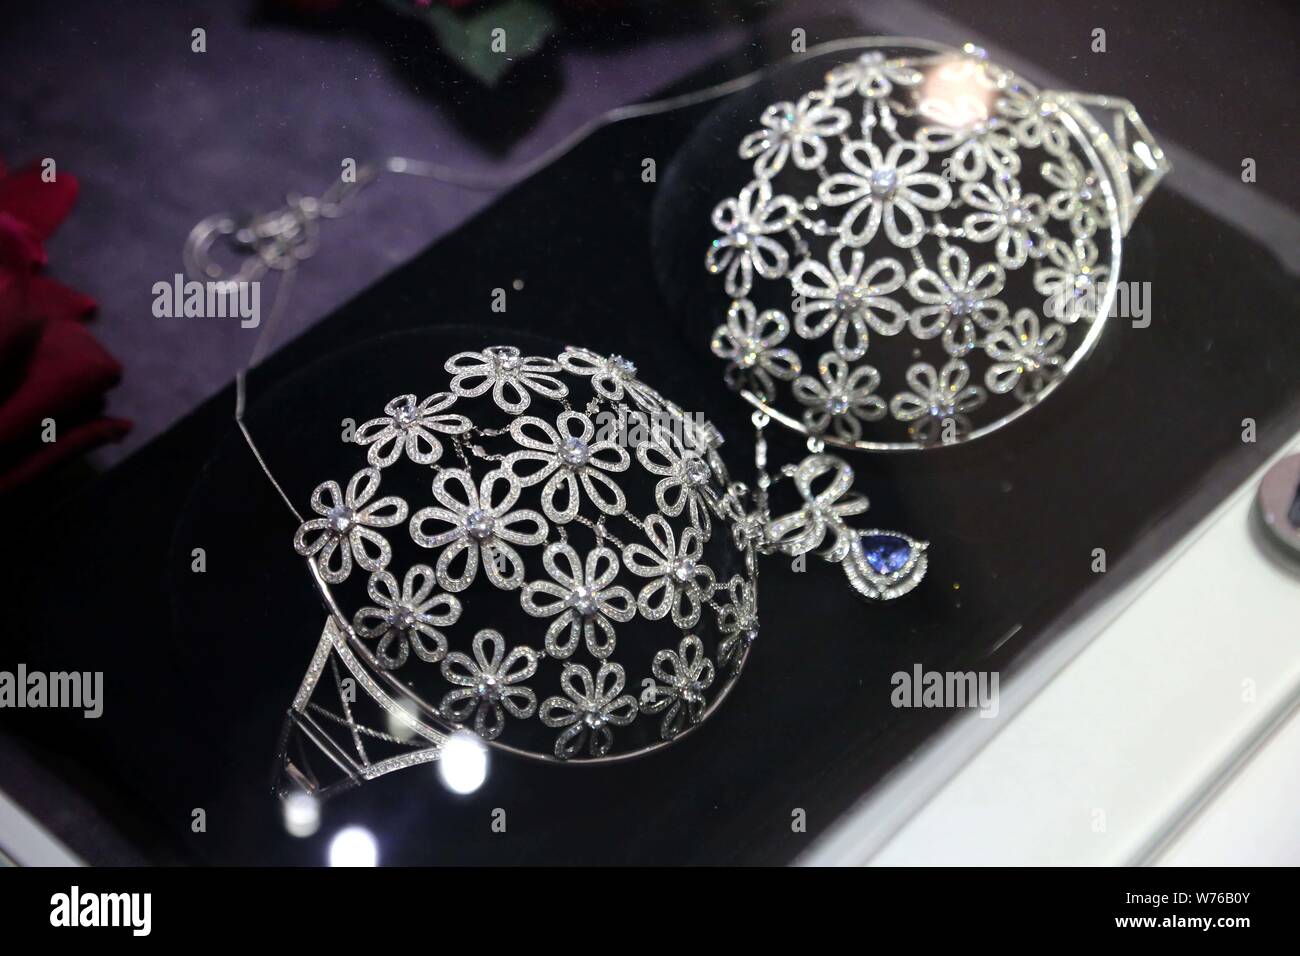 An expensive bra sold for 10,000,000 yuan ($1,510,596.8) is on